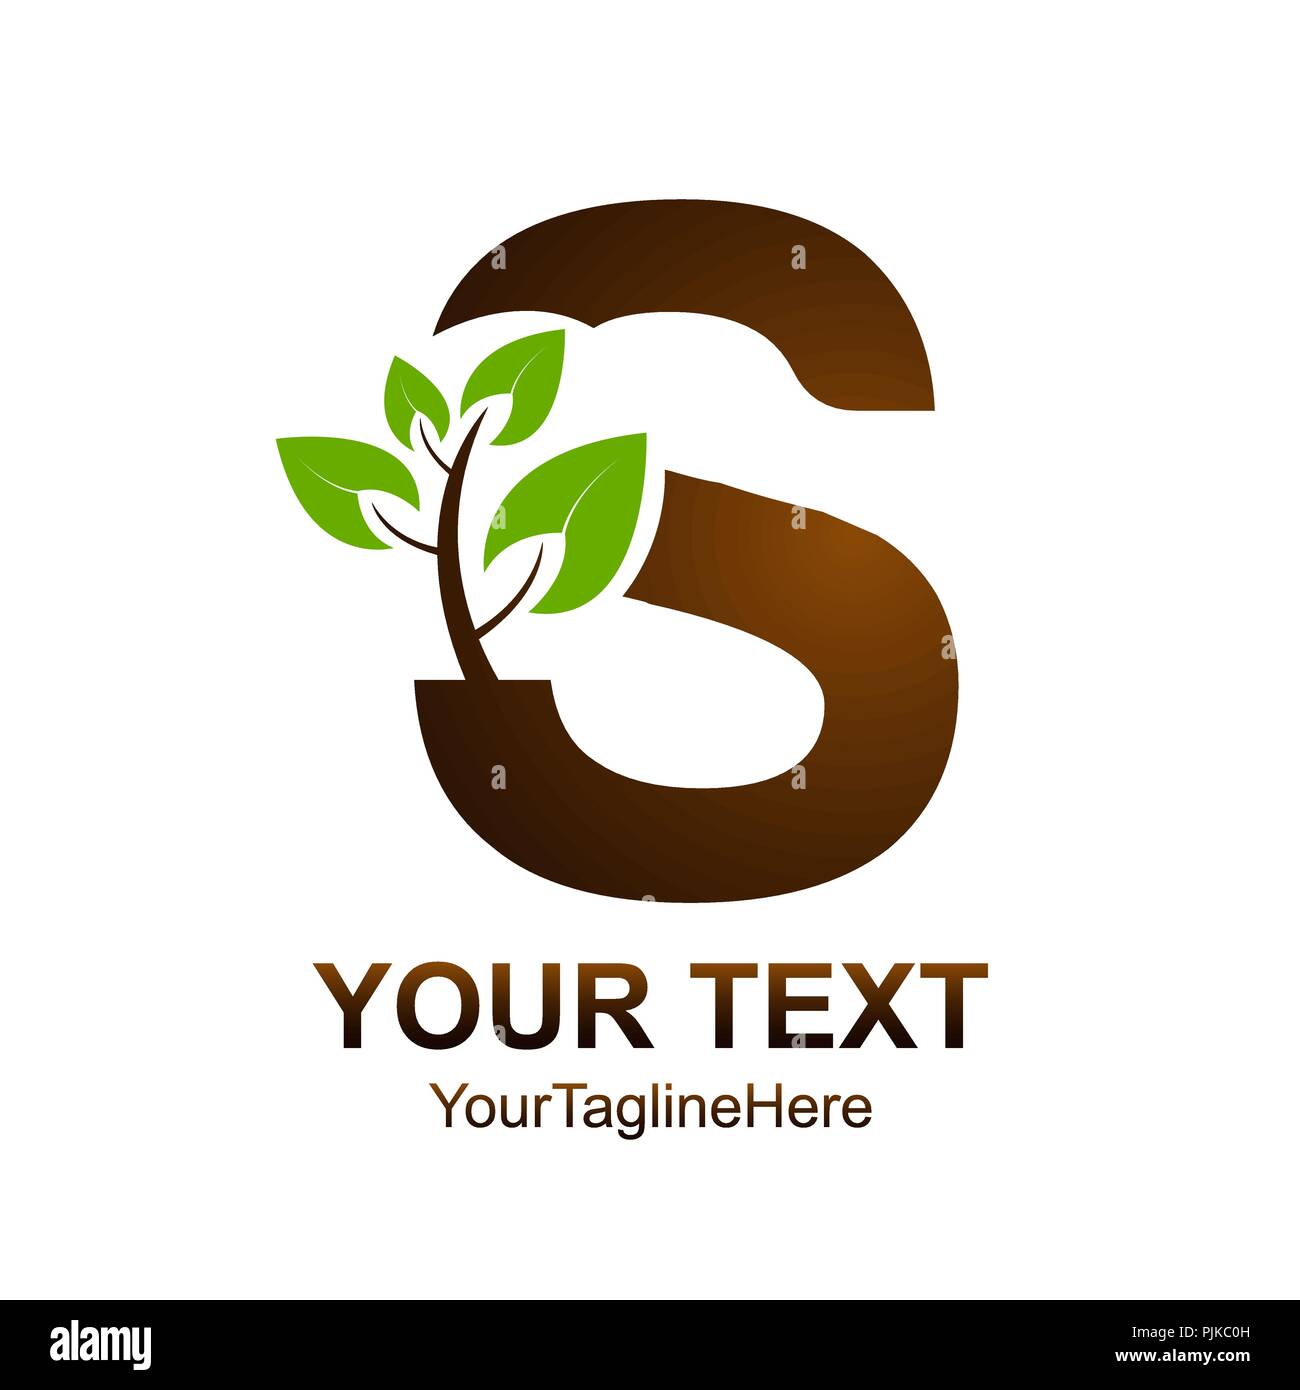 Letter S logo design template colored brown green leaf nature design for business and company identity. Abstract initial S alphabet logo element. Stock Vector